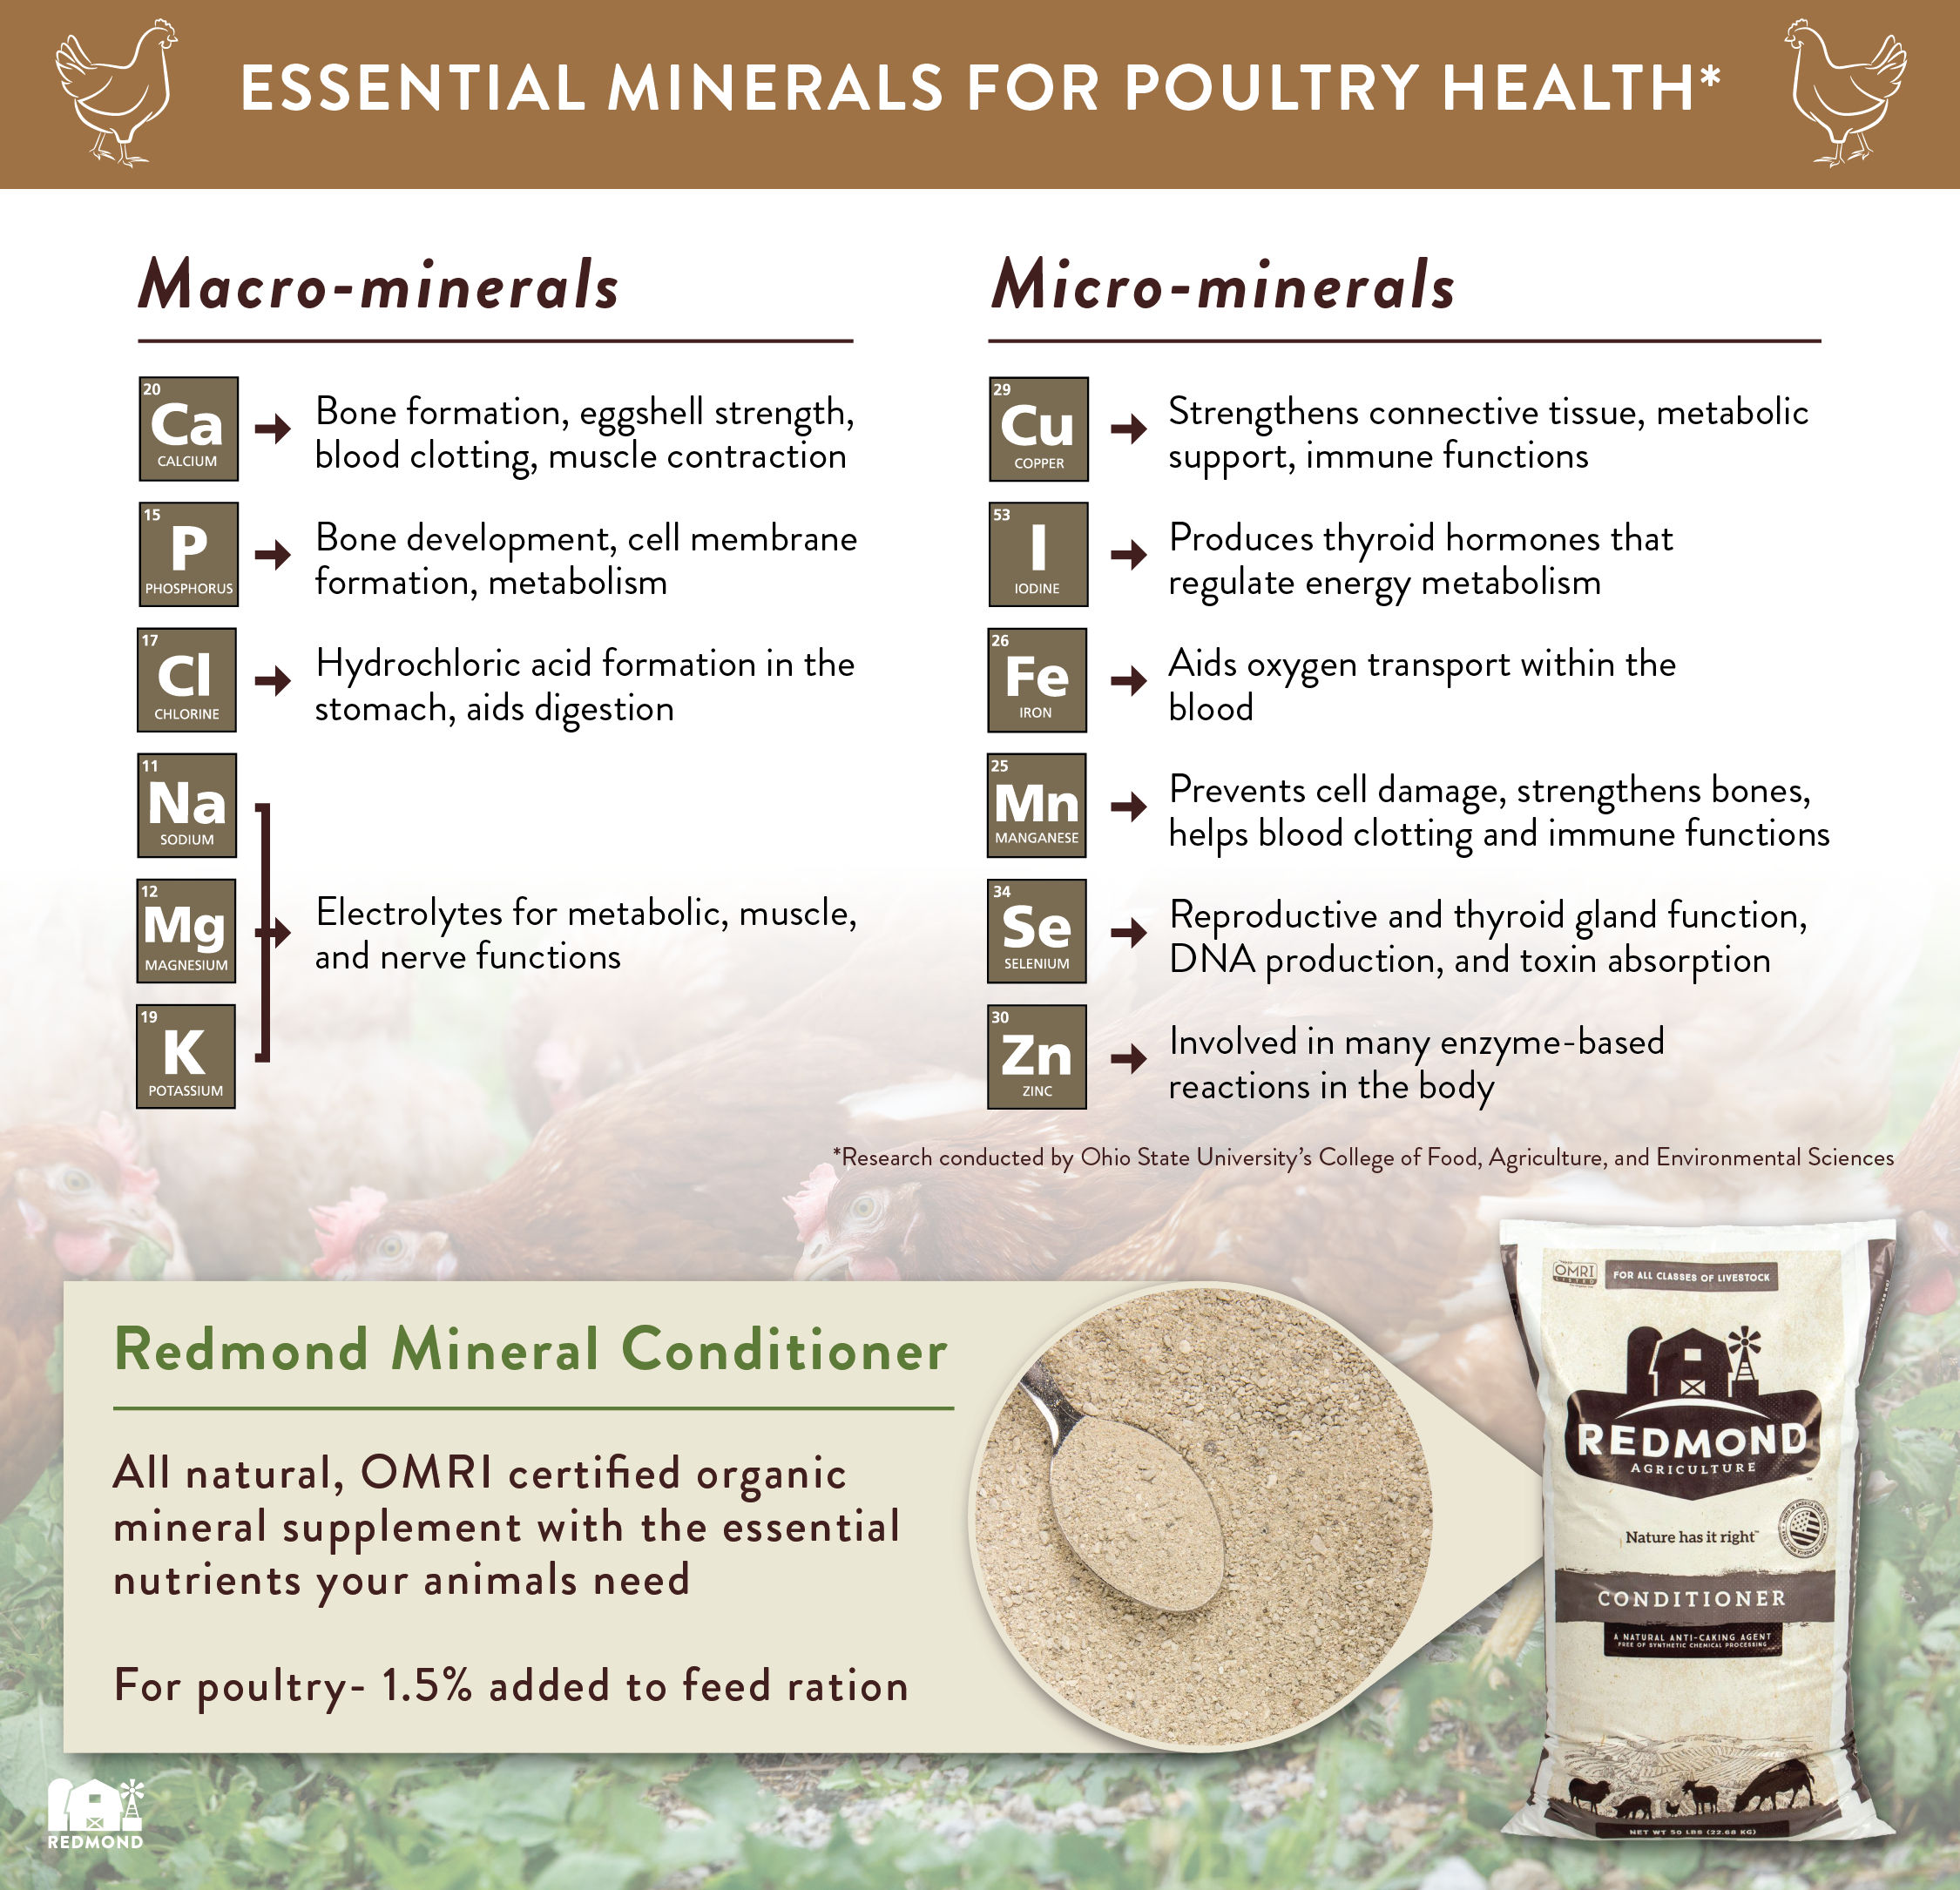 Essential minerals for poultry health